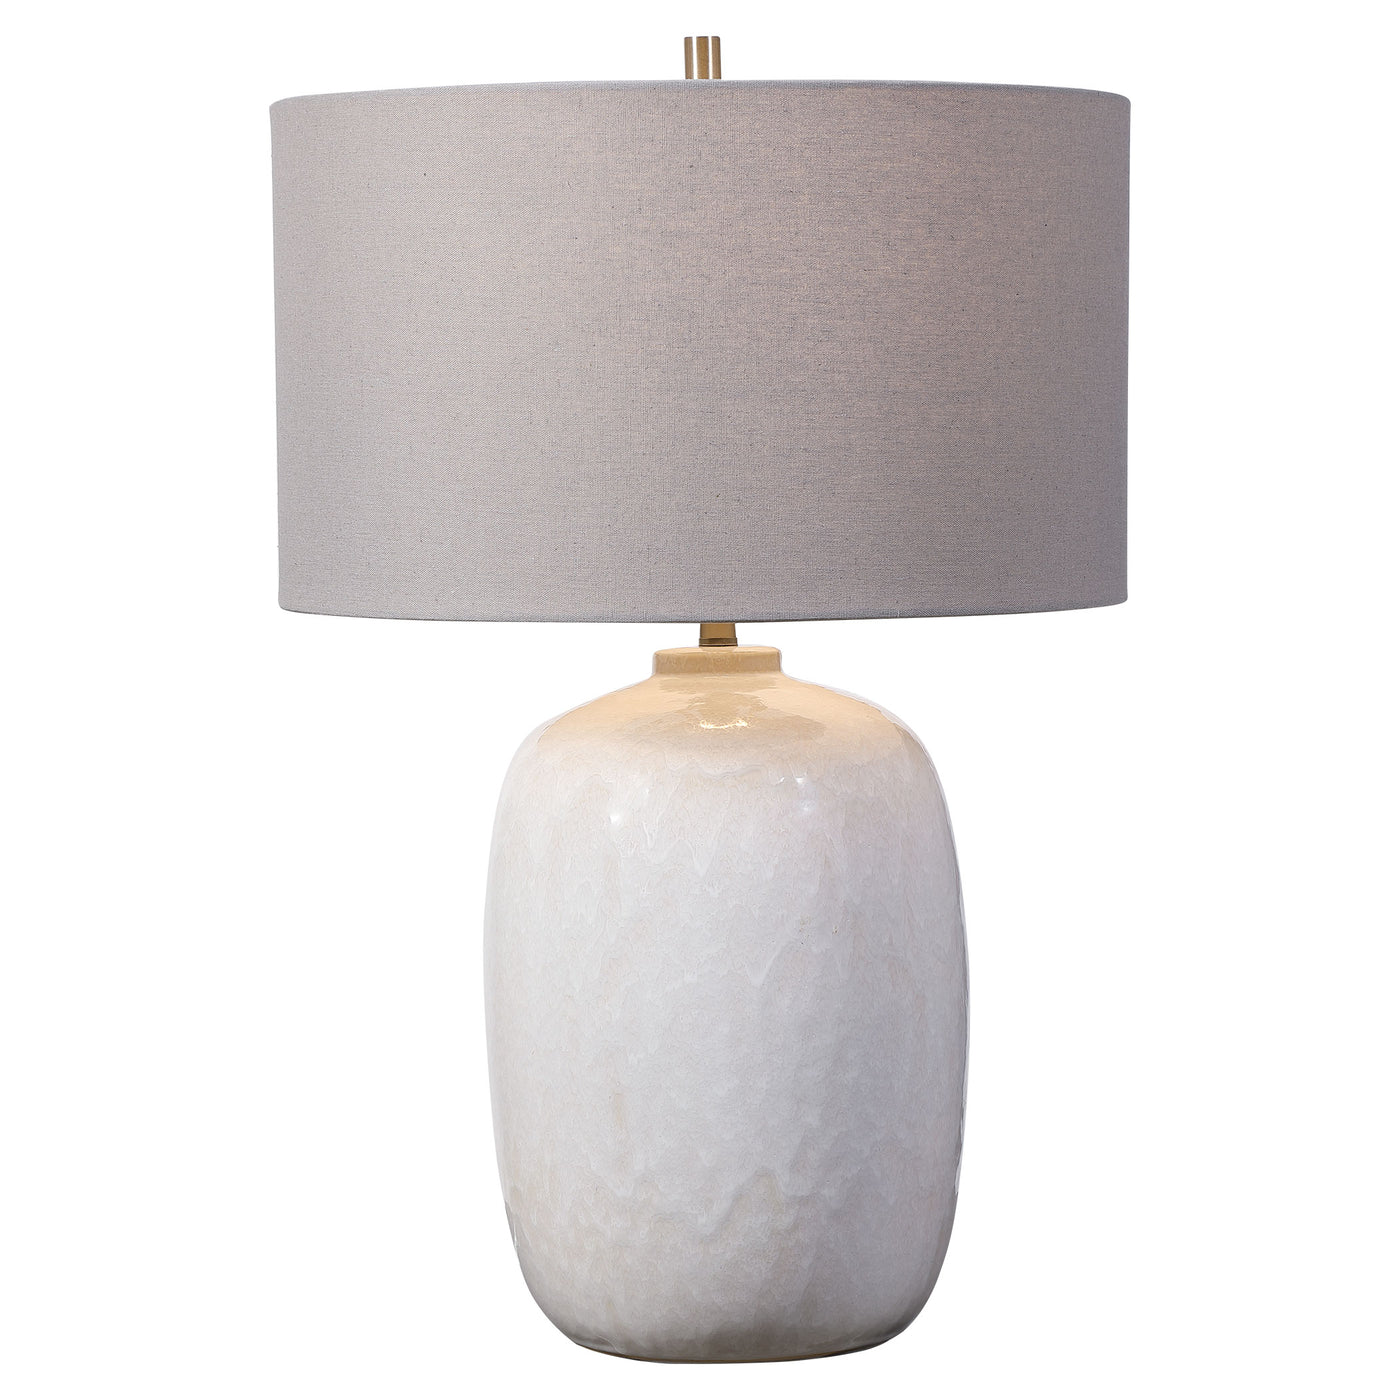 Simple Yet Versatile, This Ceramic Table Lamp Features A Cream-ivory Drip Glaze With Subtle Texture, Accented By Brushed N...